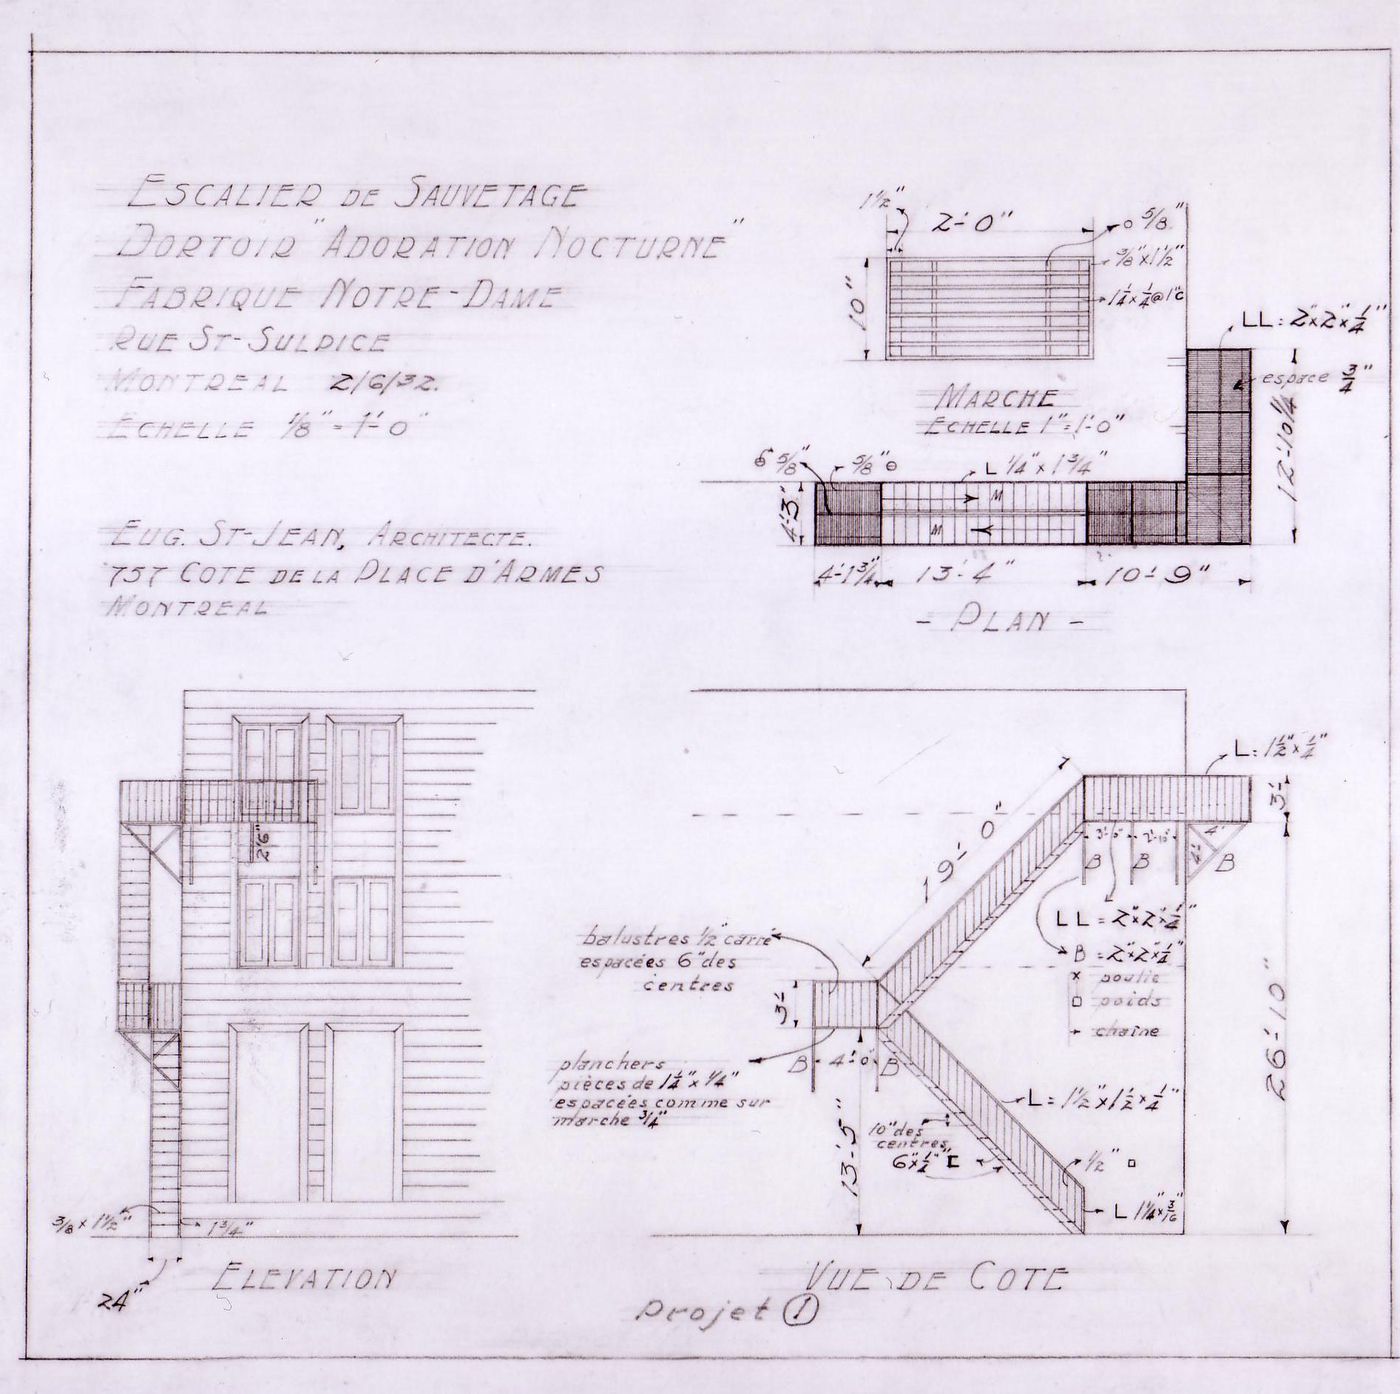 Plan and elevations for the fire escape for the Adoration Nocturne dormitory for Notre-Dame de Montréal, apparently for the renovations of 1929-1949